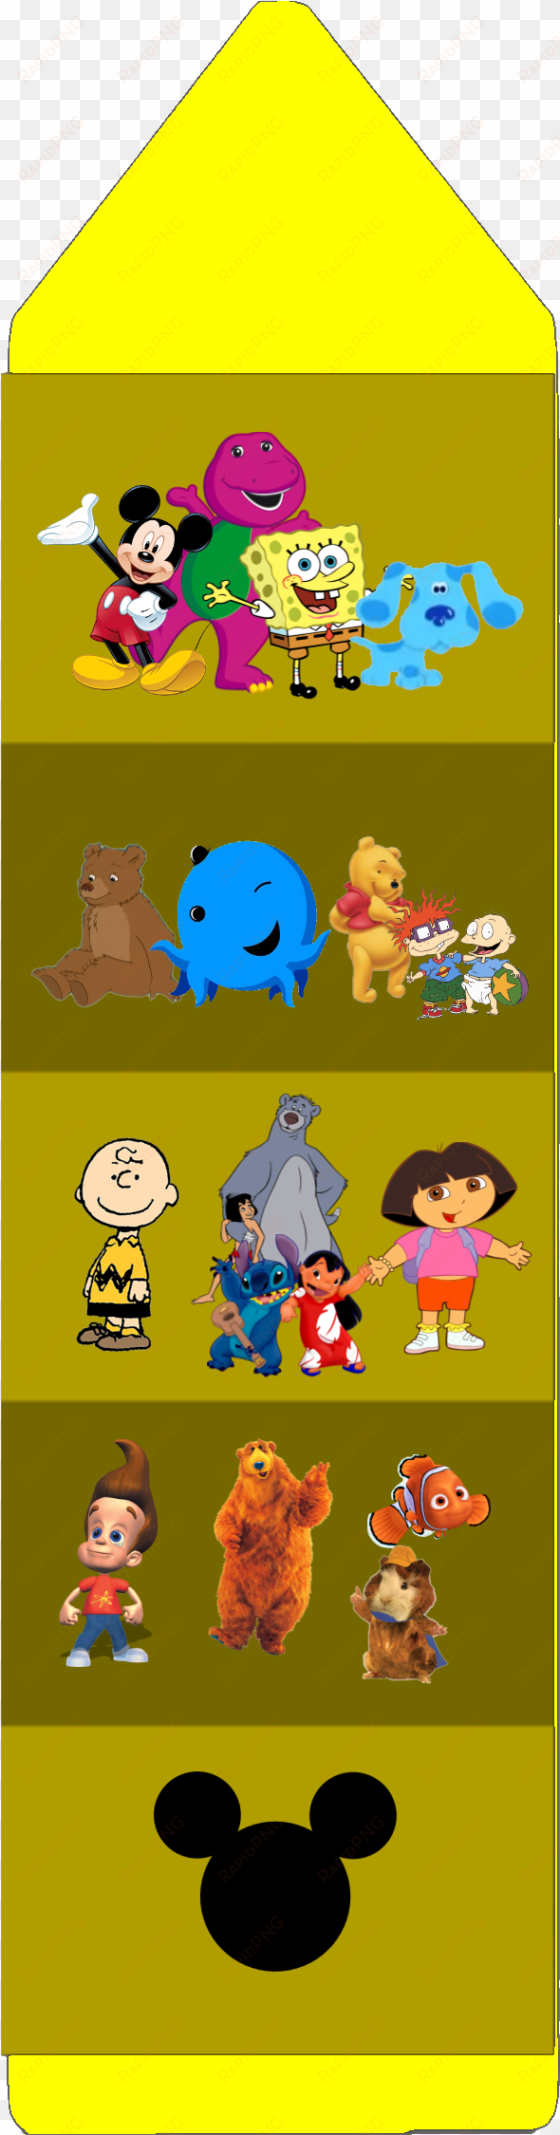 yellow crayon blues clues and mickeys clues pinterest - blues clues yellow crayon